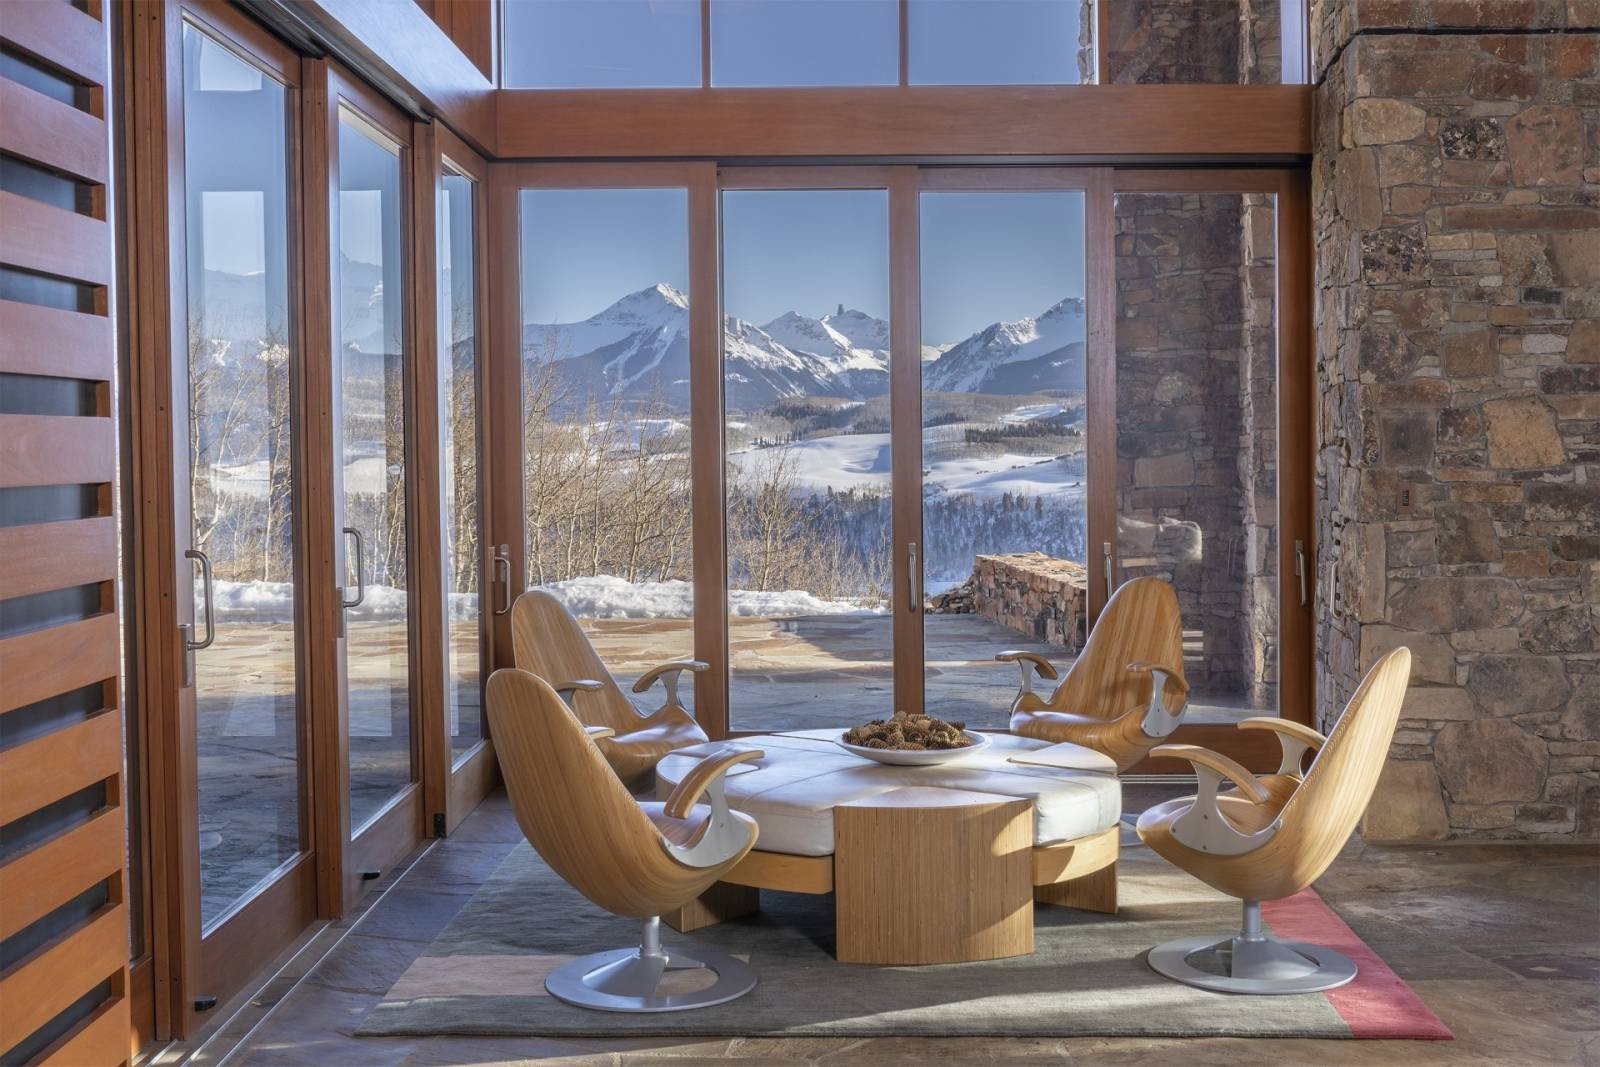 Telluride Vacation Rentals, PaGomo* - Rich woods, indigenous stone and warm upholstery foster feelings of tranquility for guests as they unwind in serenity, after taking advantage of the adventures this estate and its location offers. F